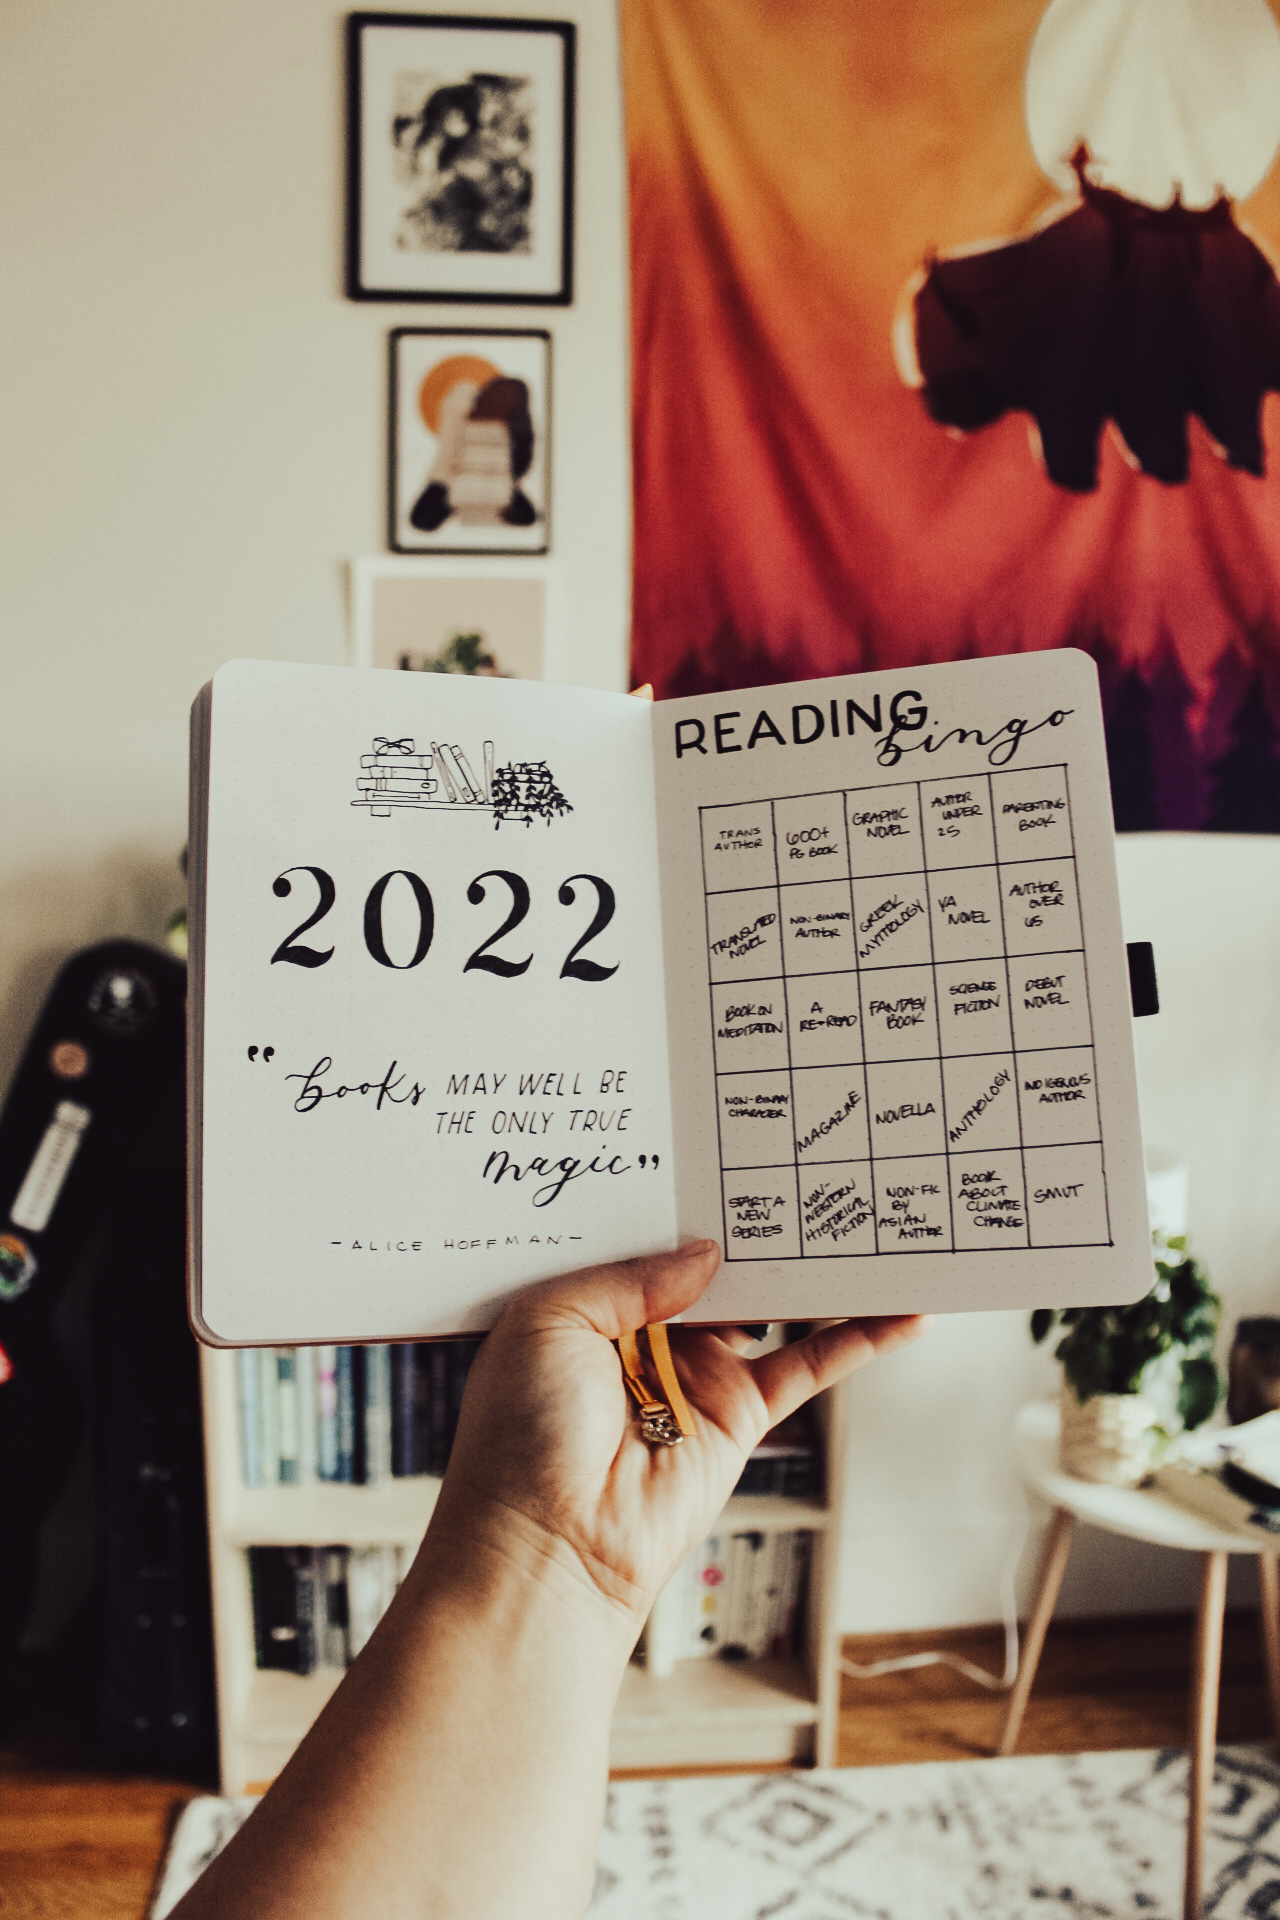 Reading journal spreads with a 2022 bullet journal cover page and book bingo spread.